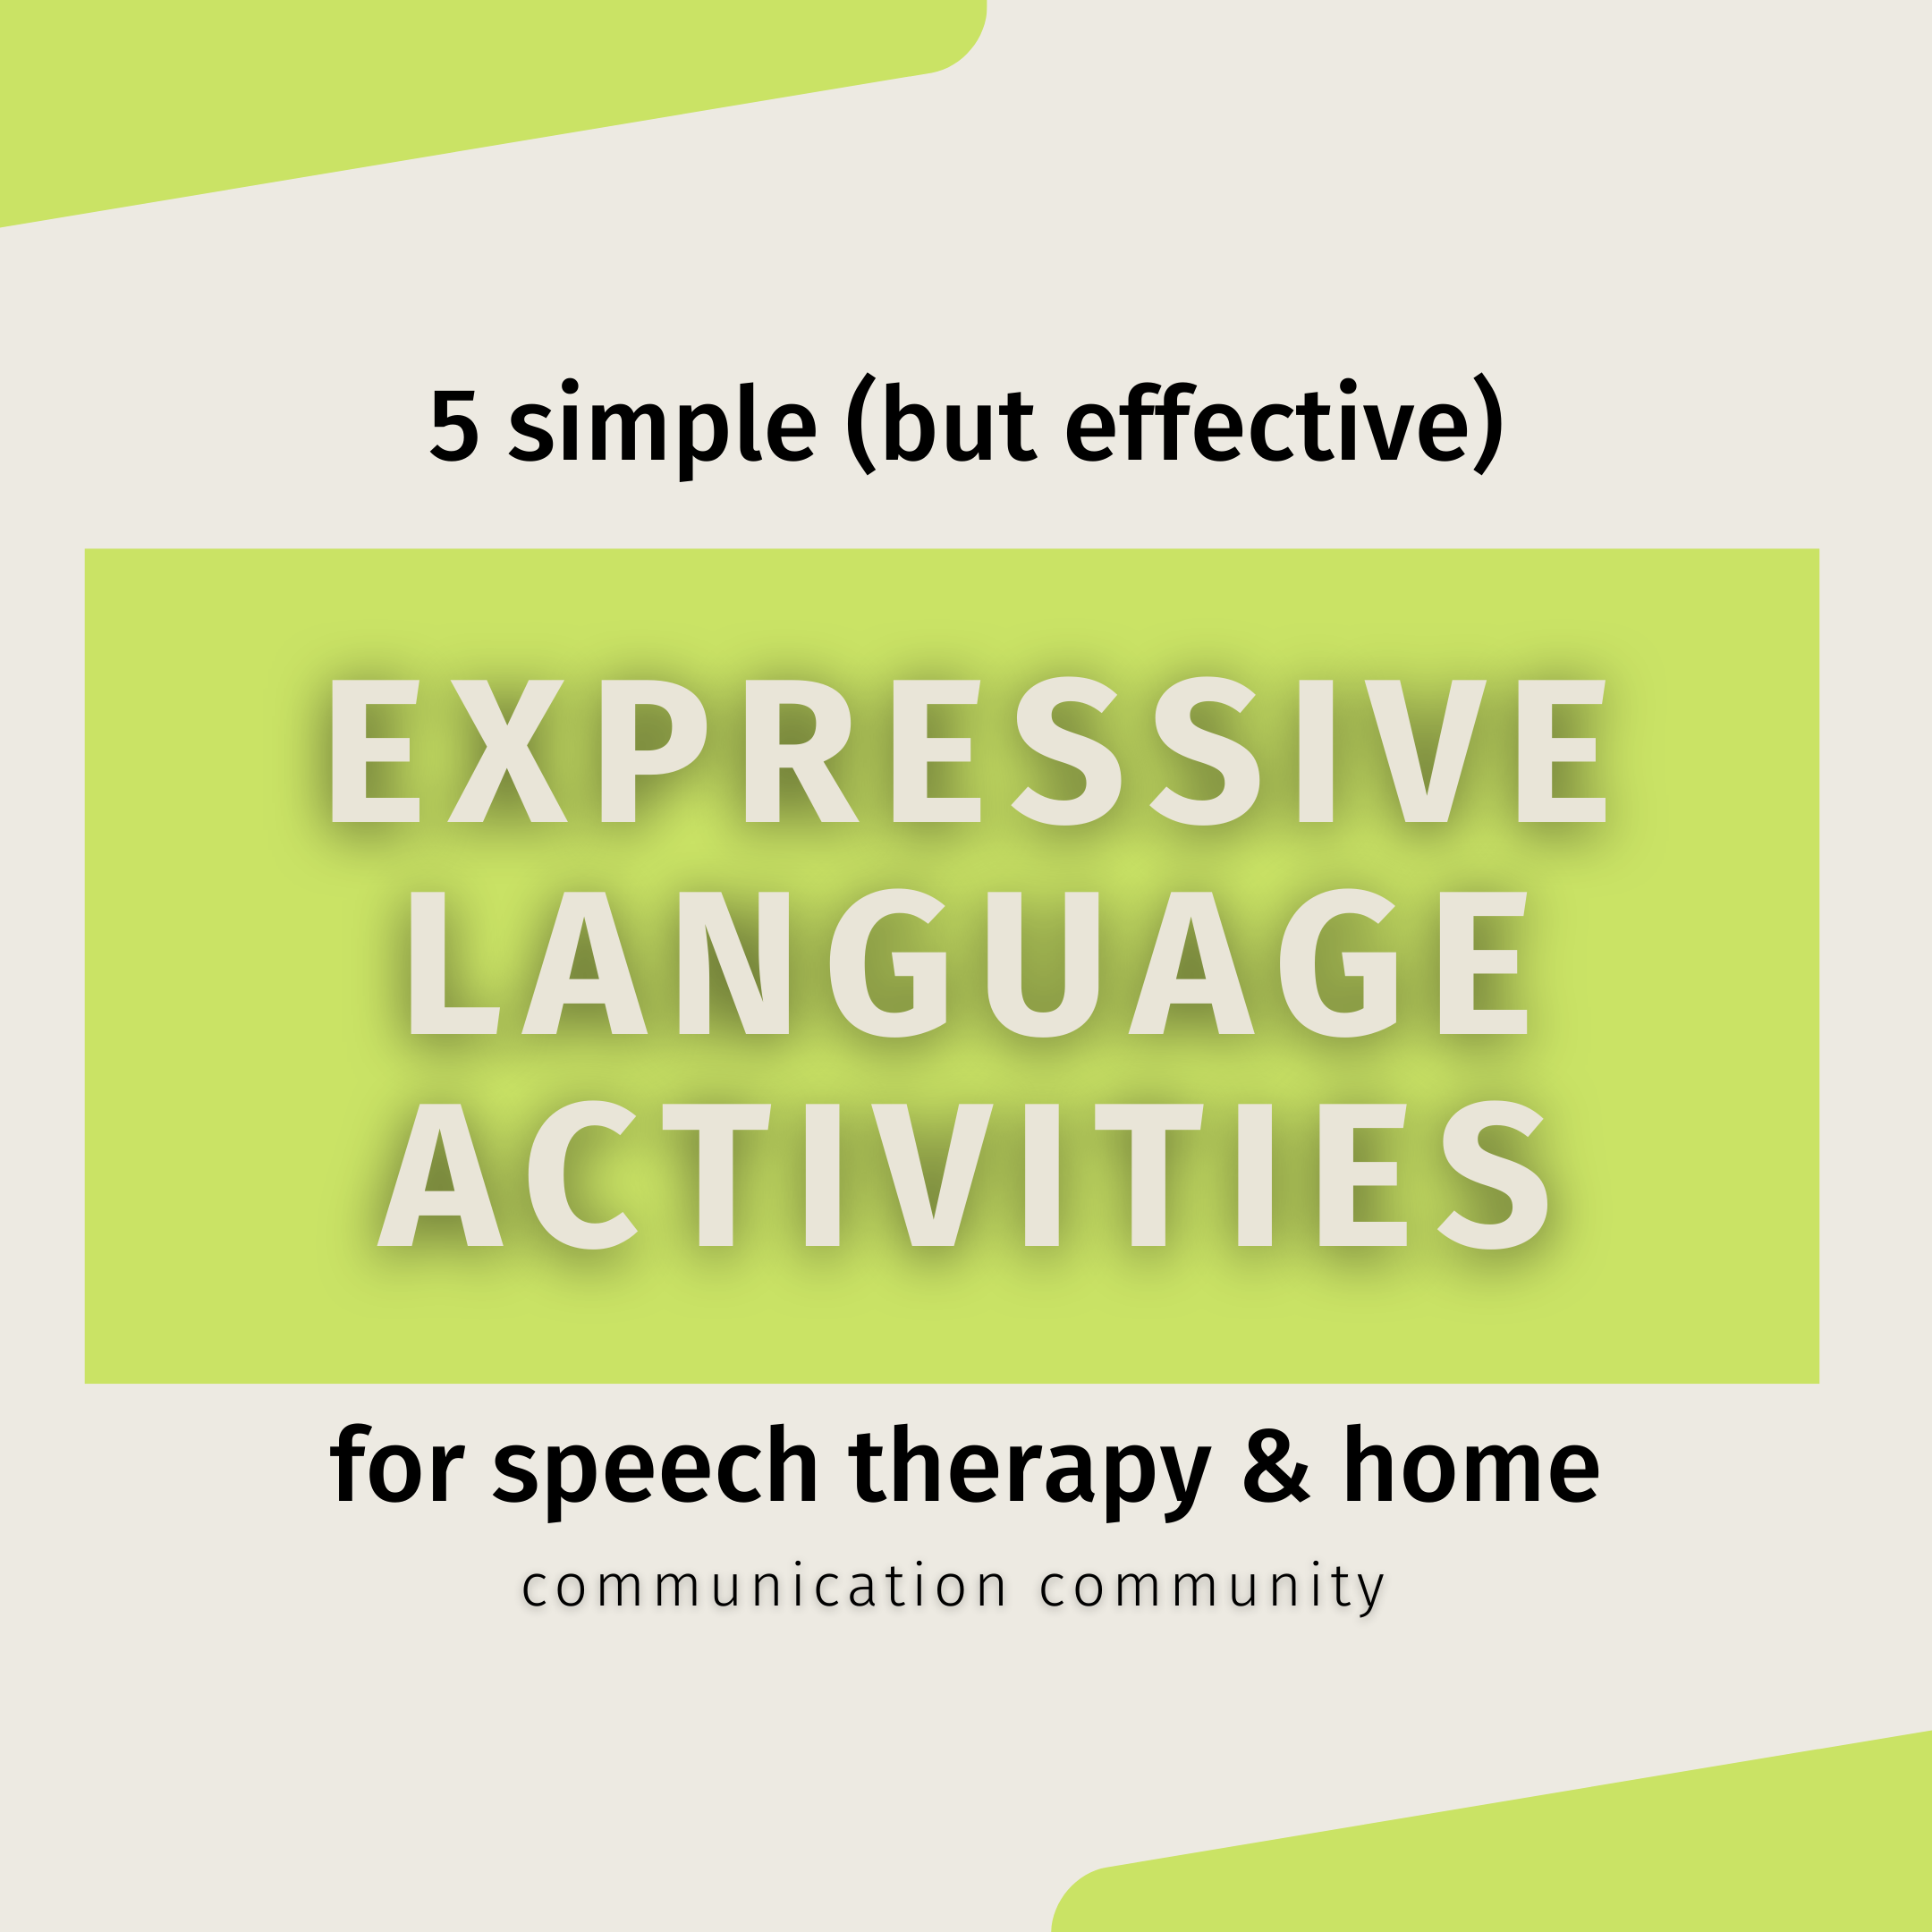 examples of receptive language